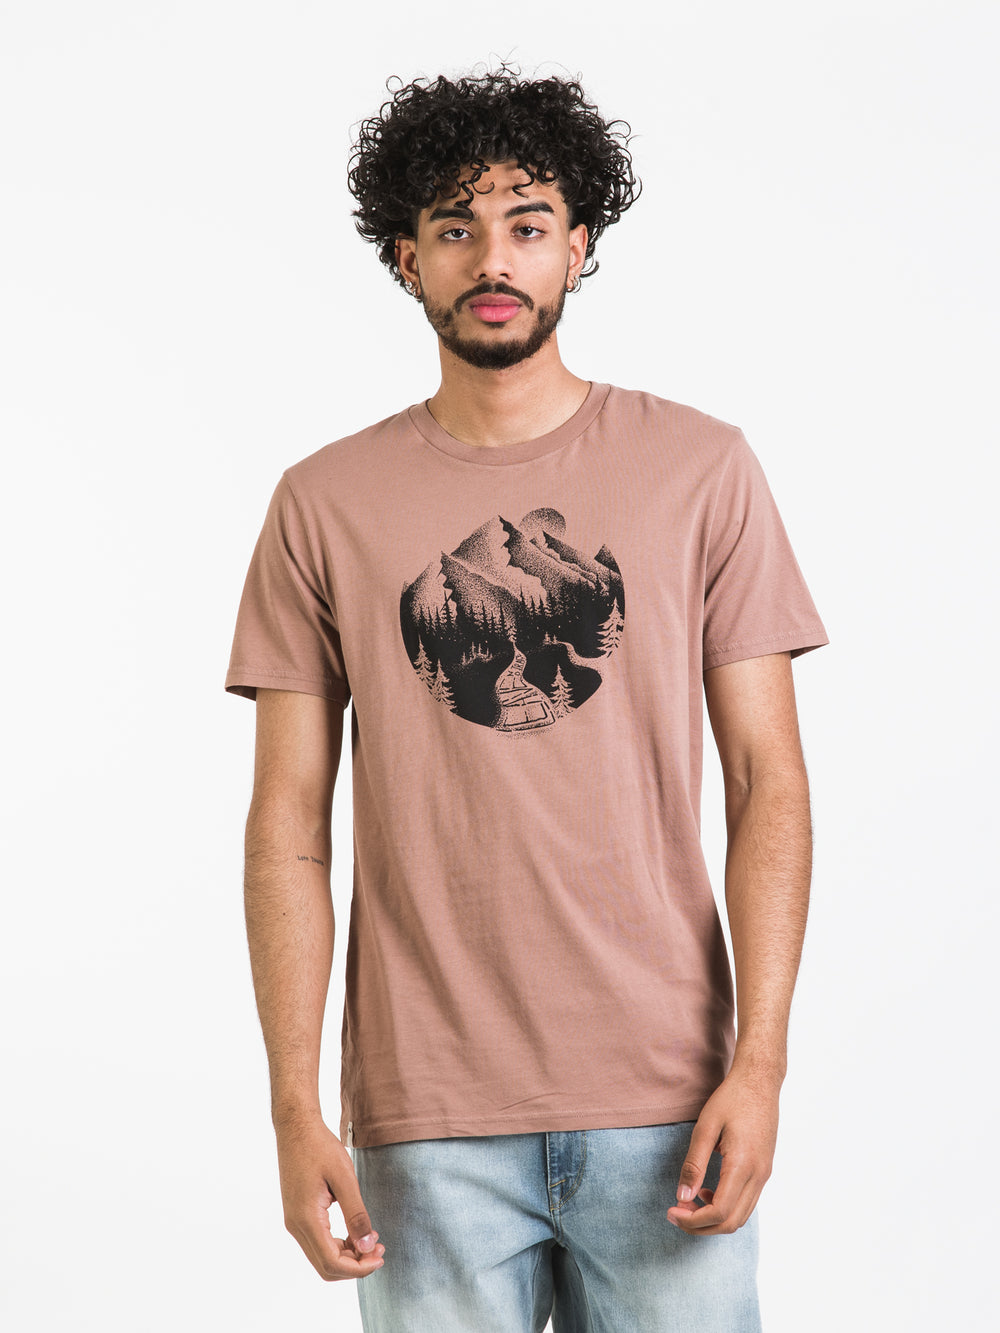 T-SHIRT TENTREE NO TRACE - DÉSTOCKAGE